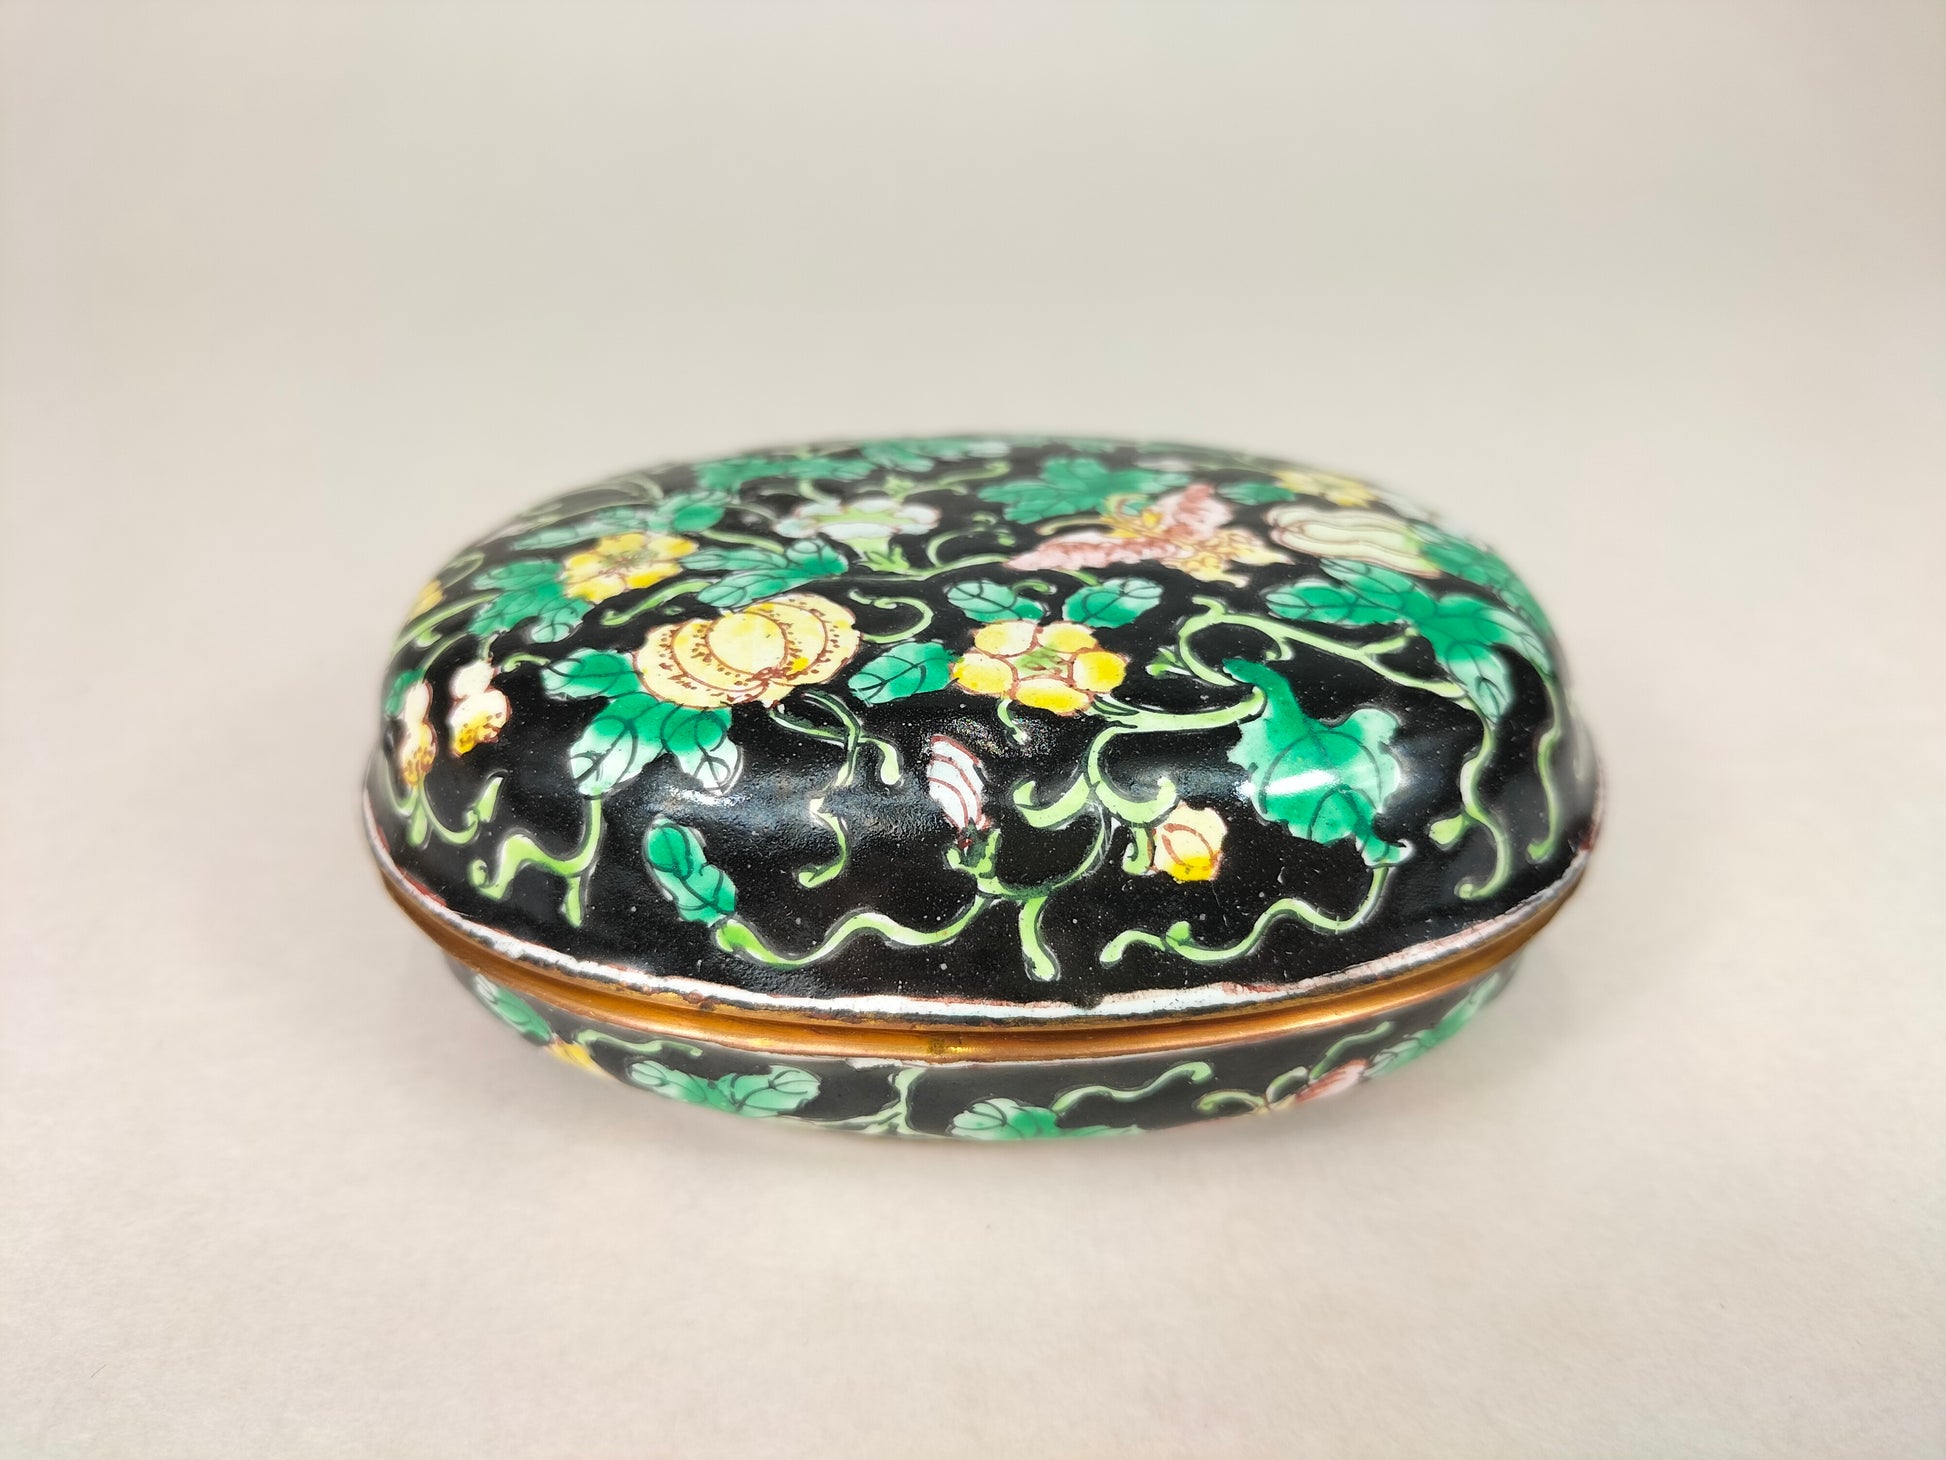 Chinese canton enamel lidded jewelry box with butterflies and flowers